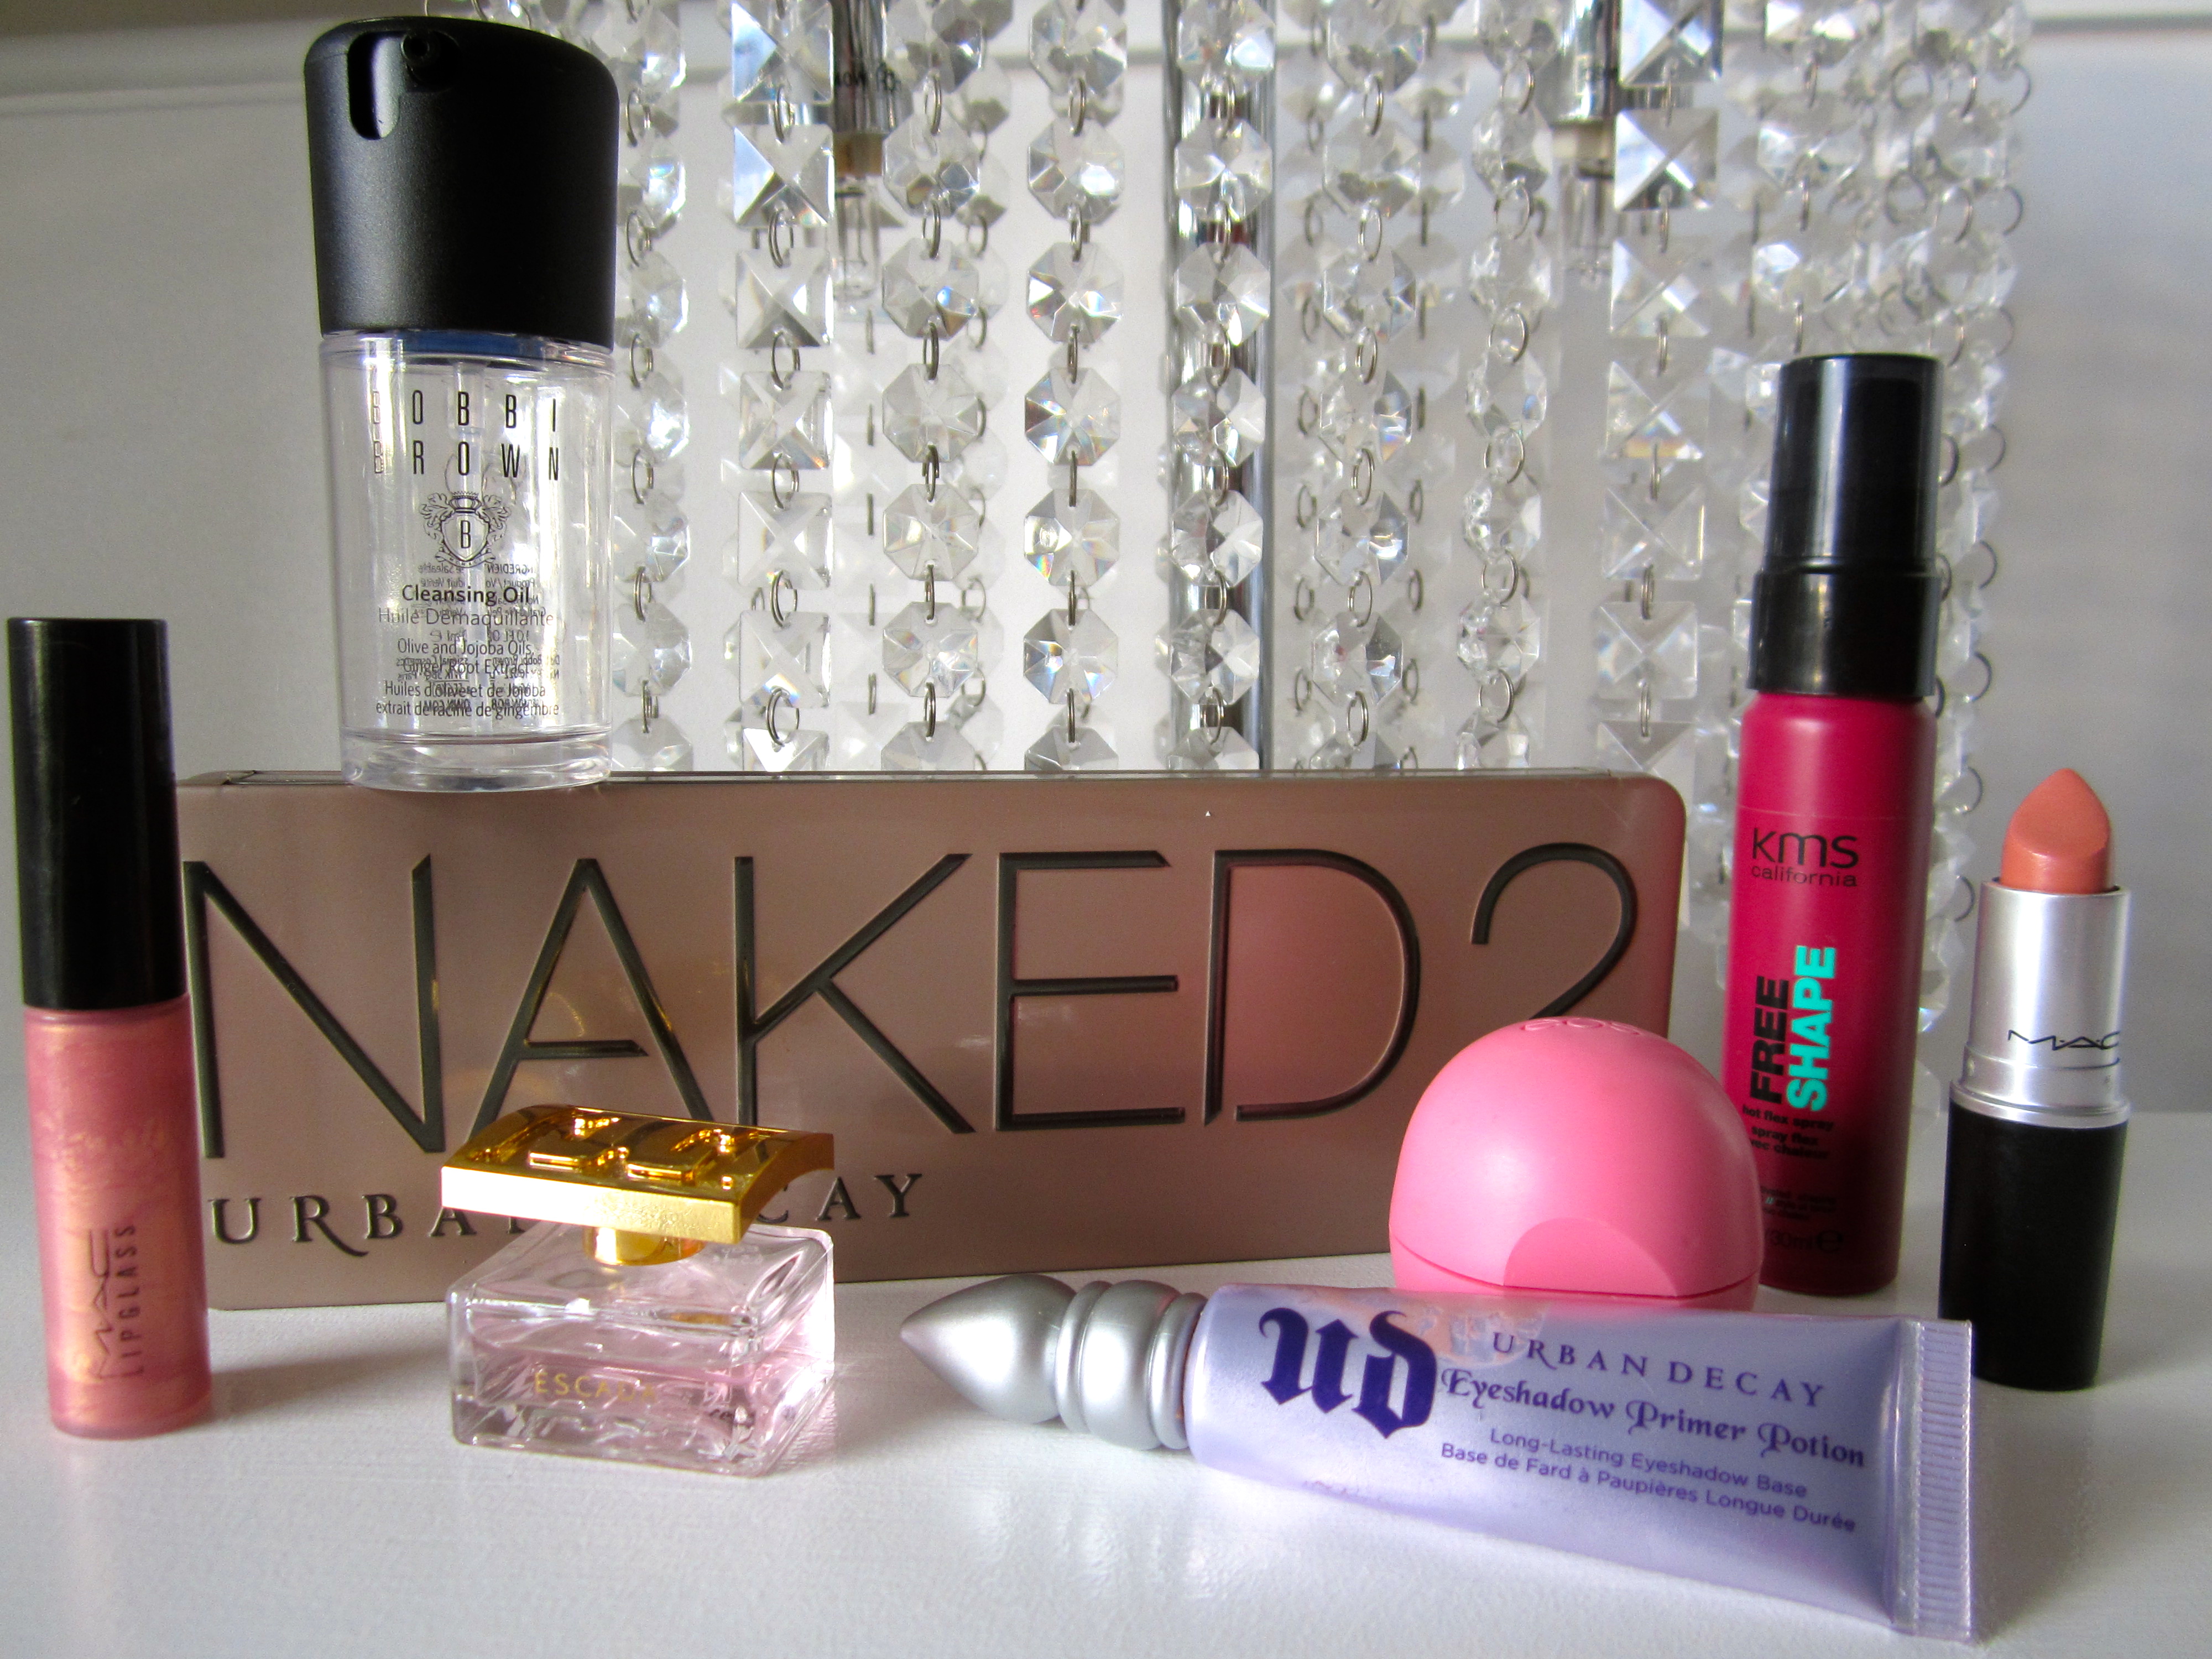 Favourite beauty products December 2012